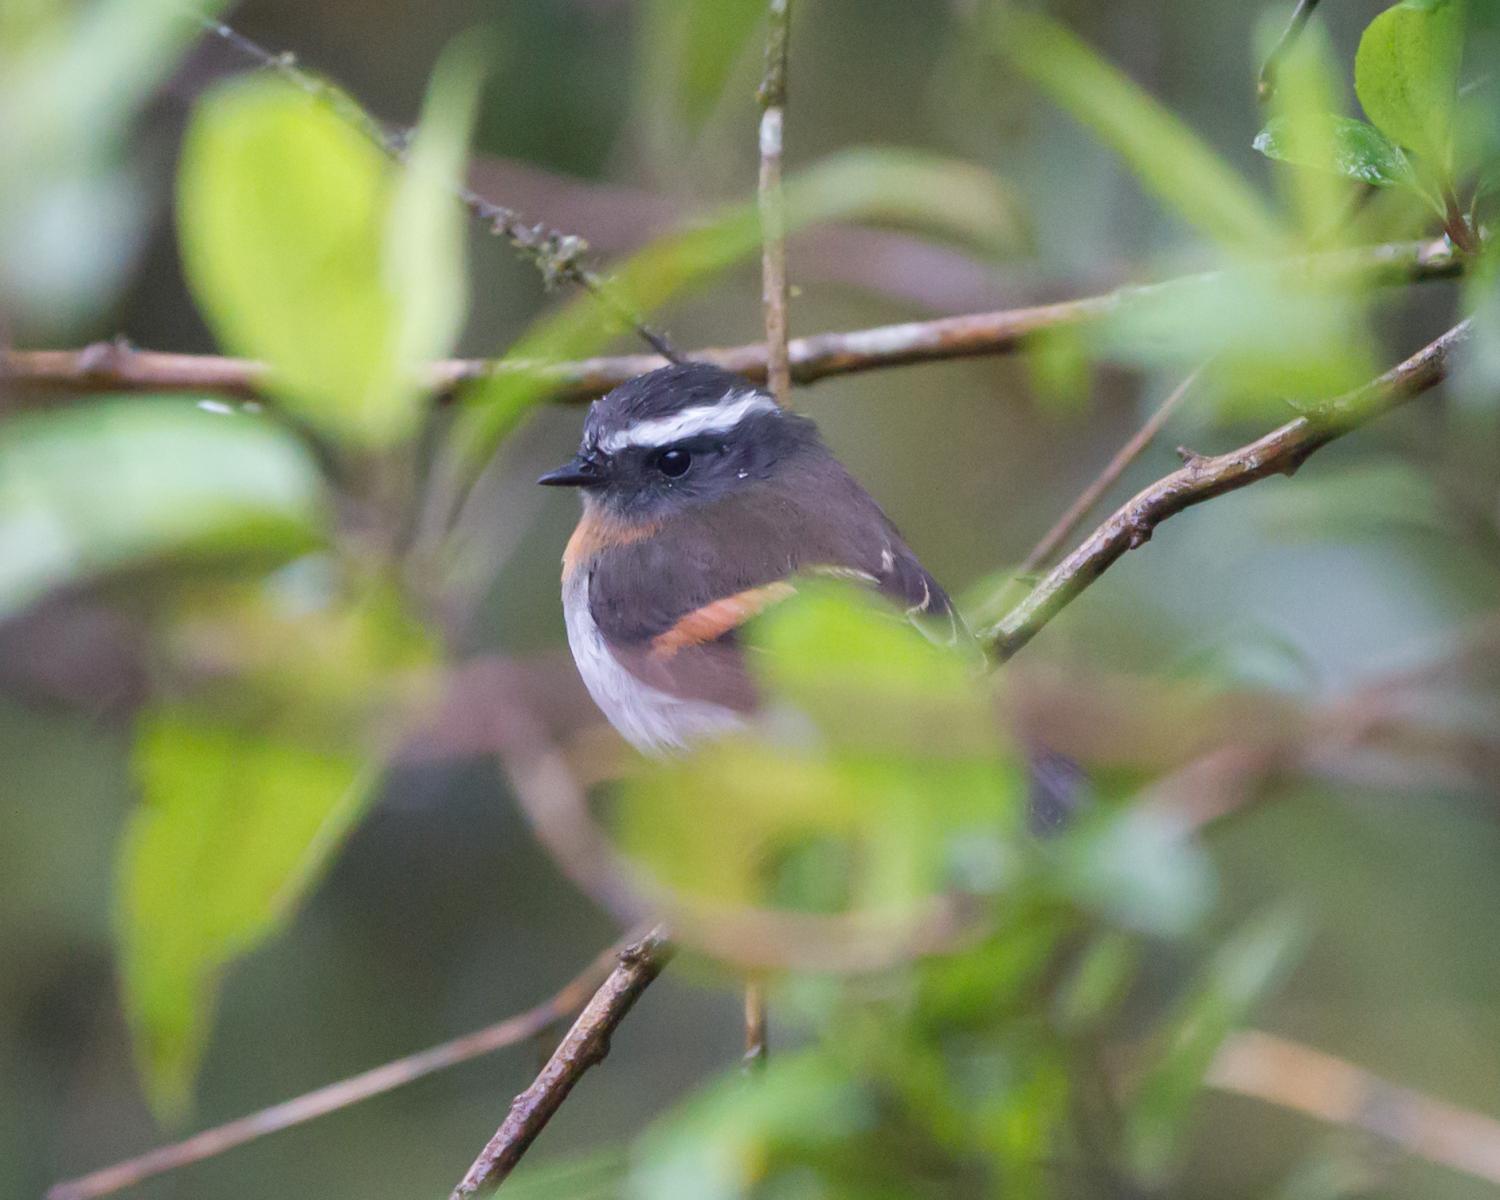 Rufous-breasted Chat-tyrant